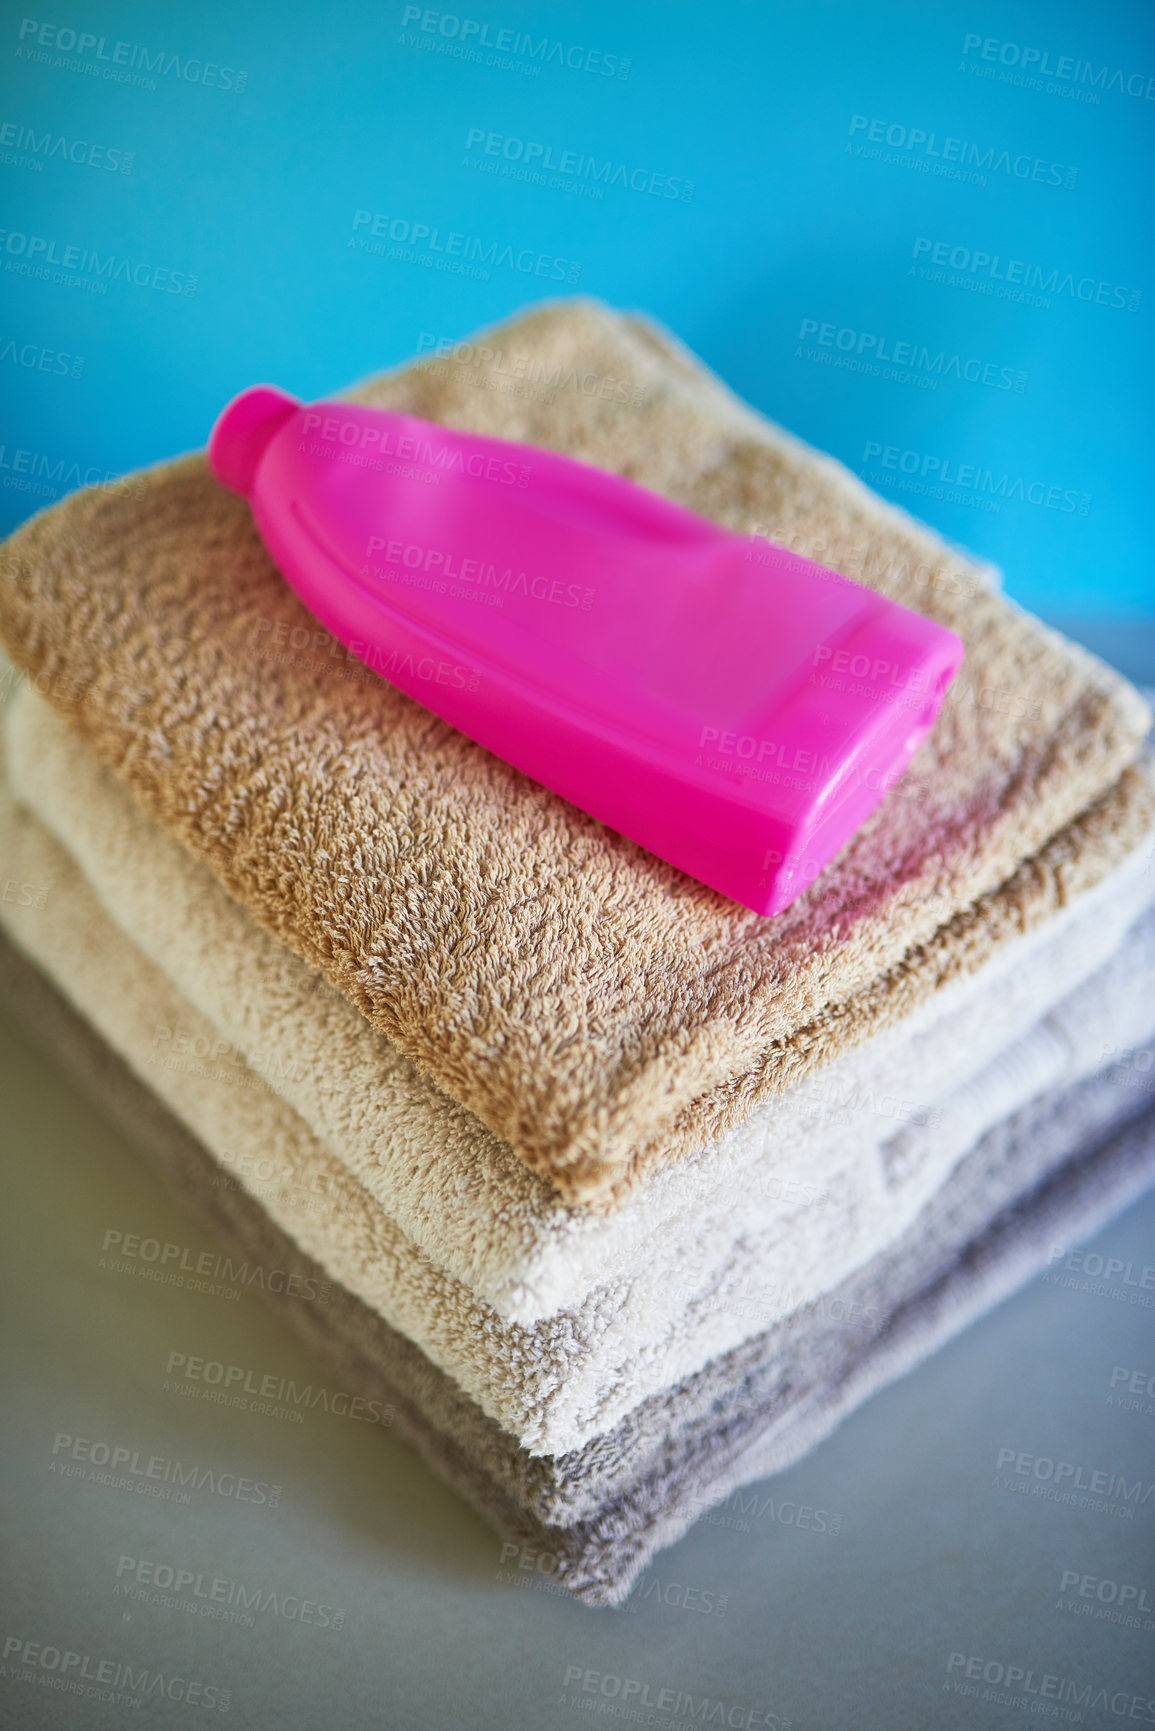 Buy stock photo Towels, detergent and washing laundry or chemical for cleaning cotton or bacteria, product or household. Cloth, sanitary and folded for neat organizing or linen with soap as service, stack or hygiene